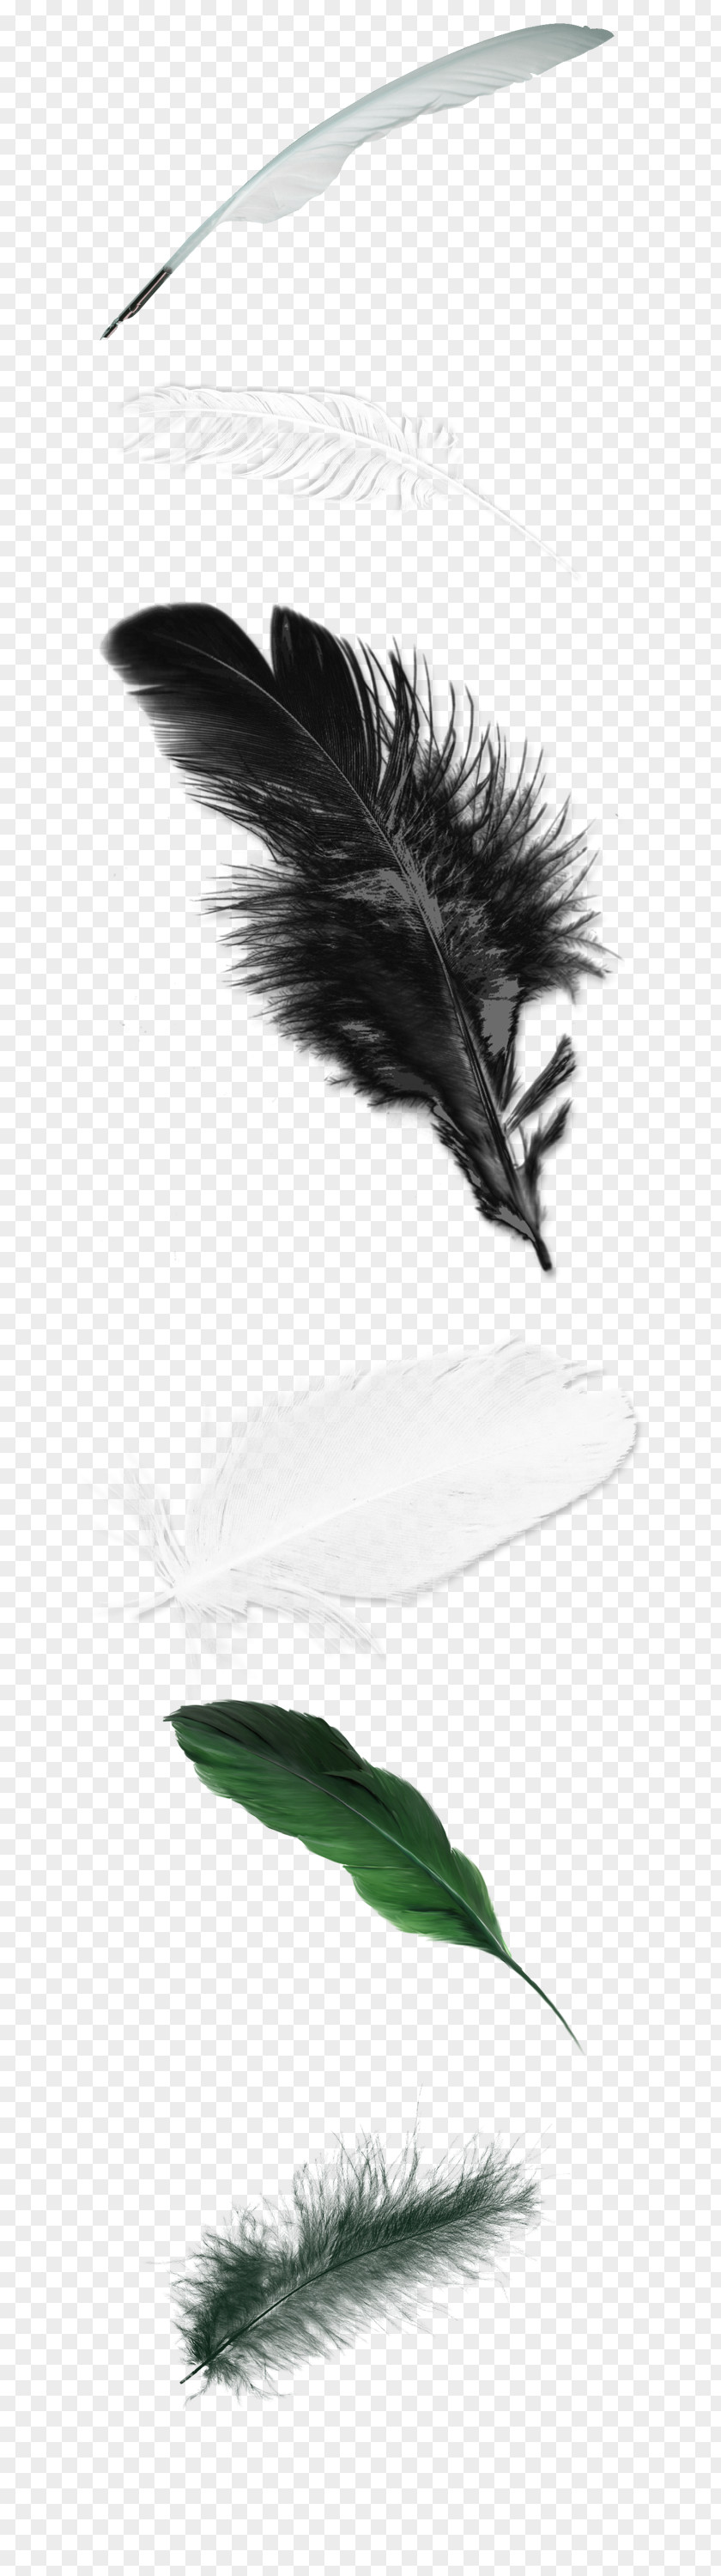 Green Fresh Feather Decorative Patterns White PNG